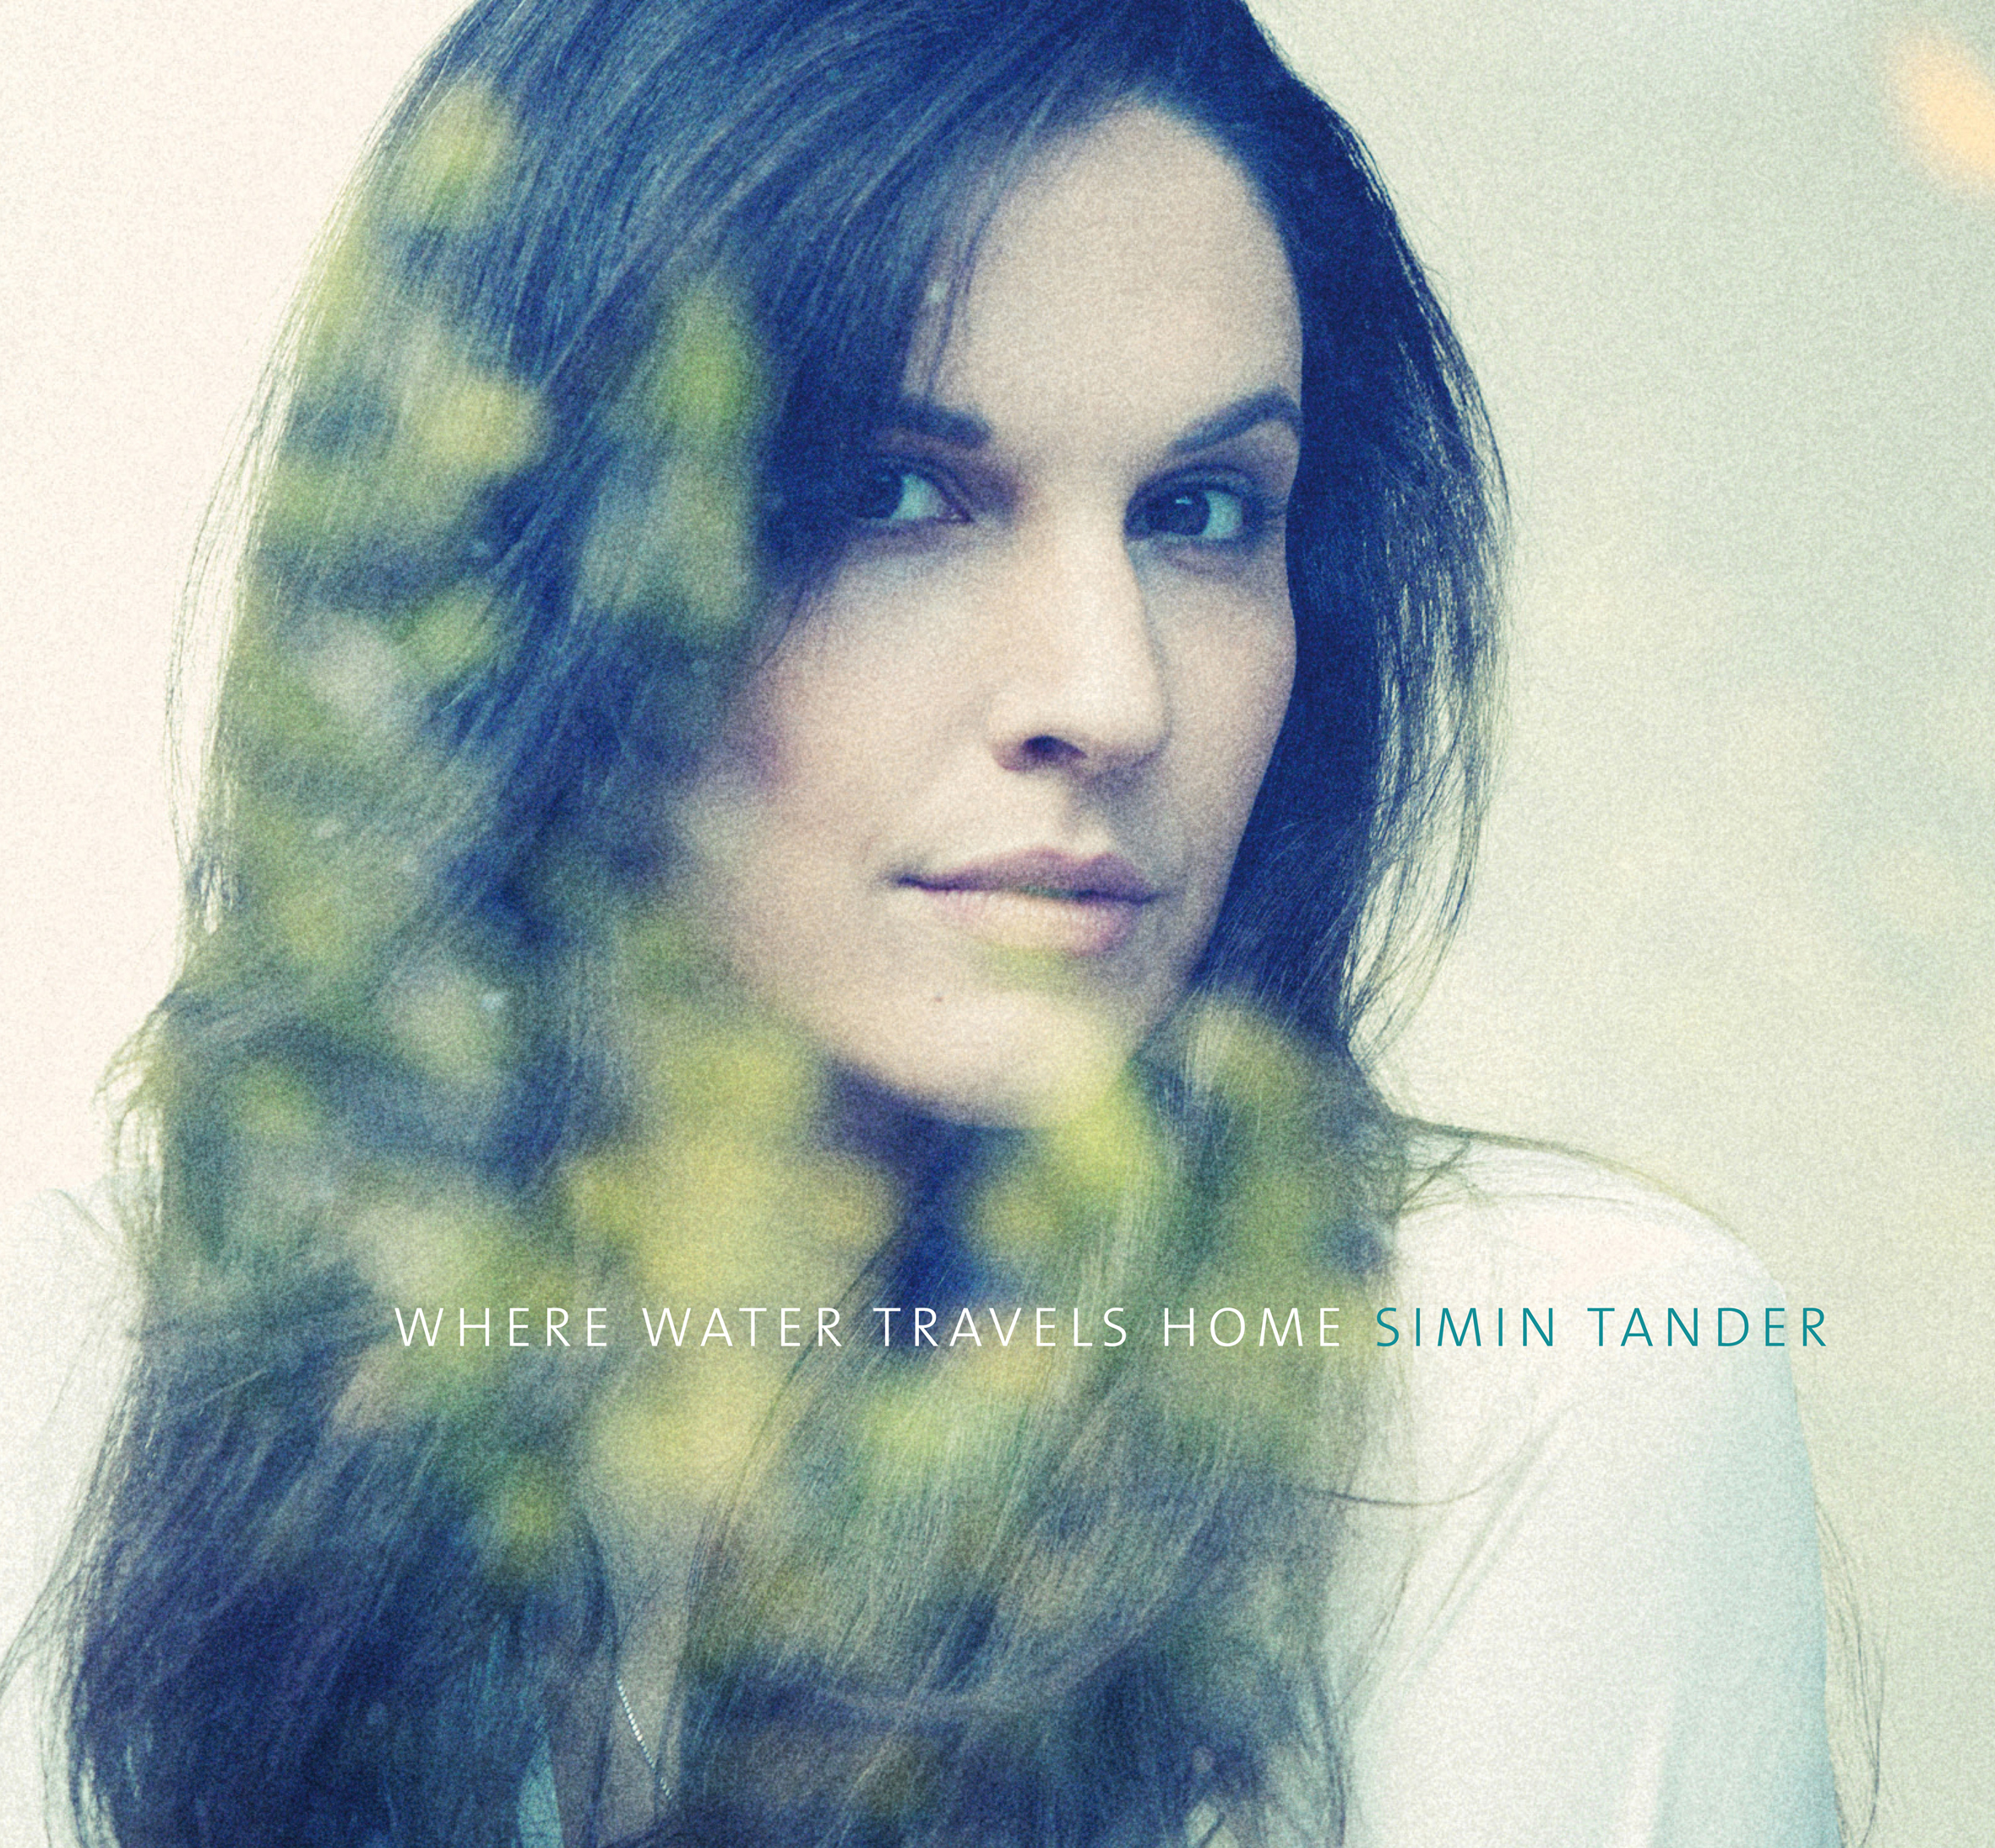 CD-Cover "Where Water Travels Home" von Simin Tander; Foto: www.simintander.com